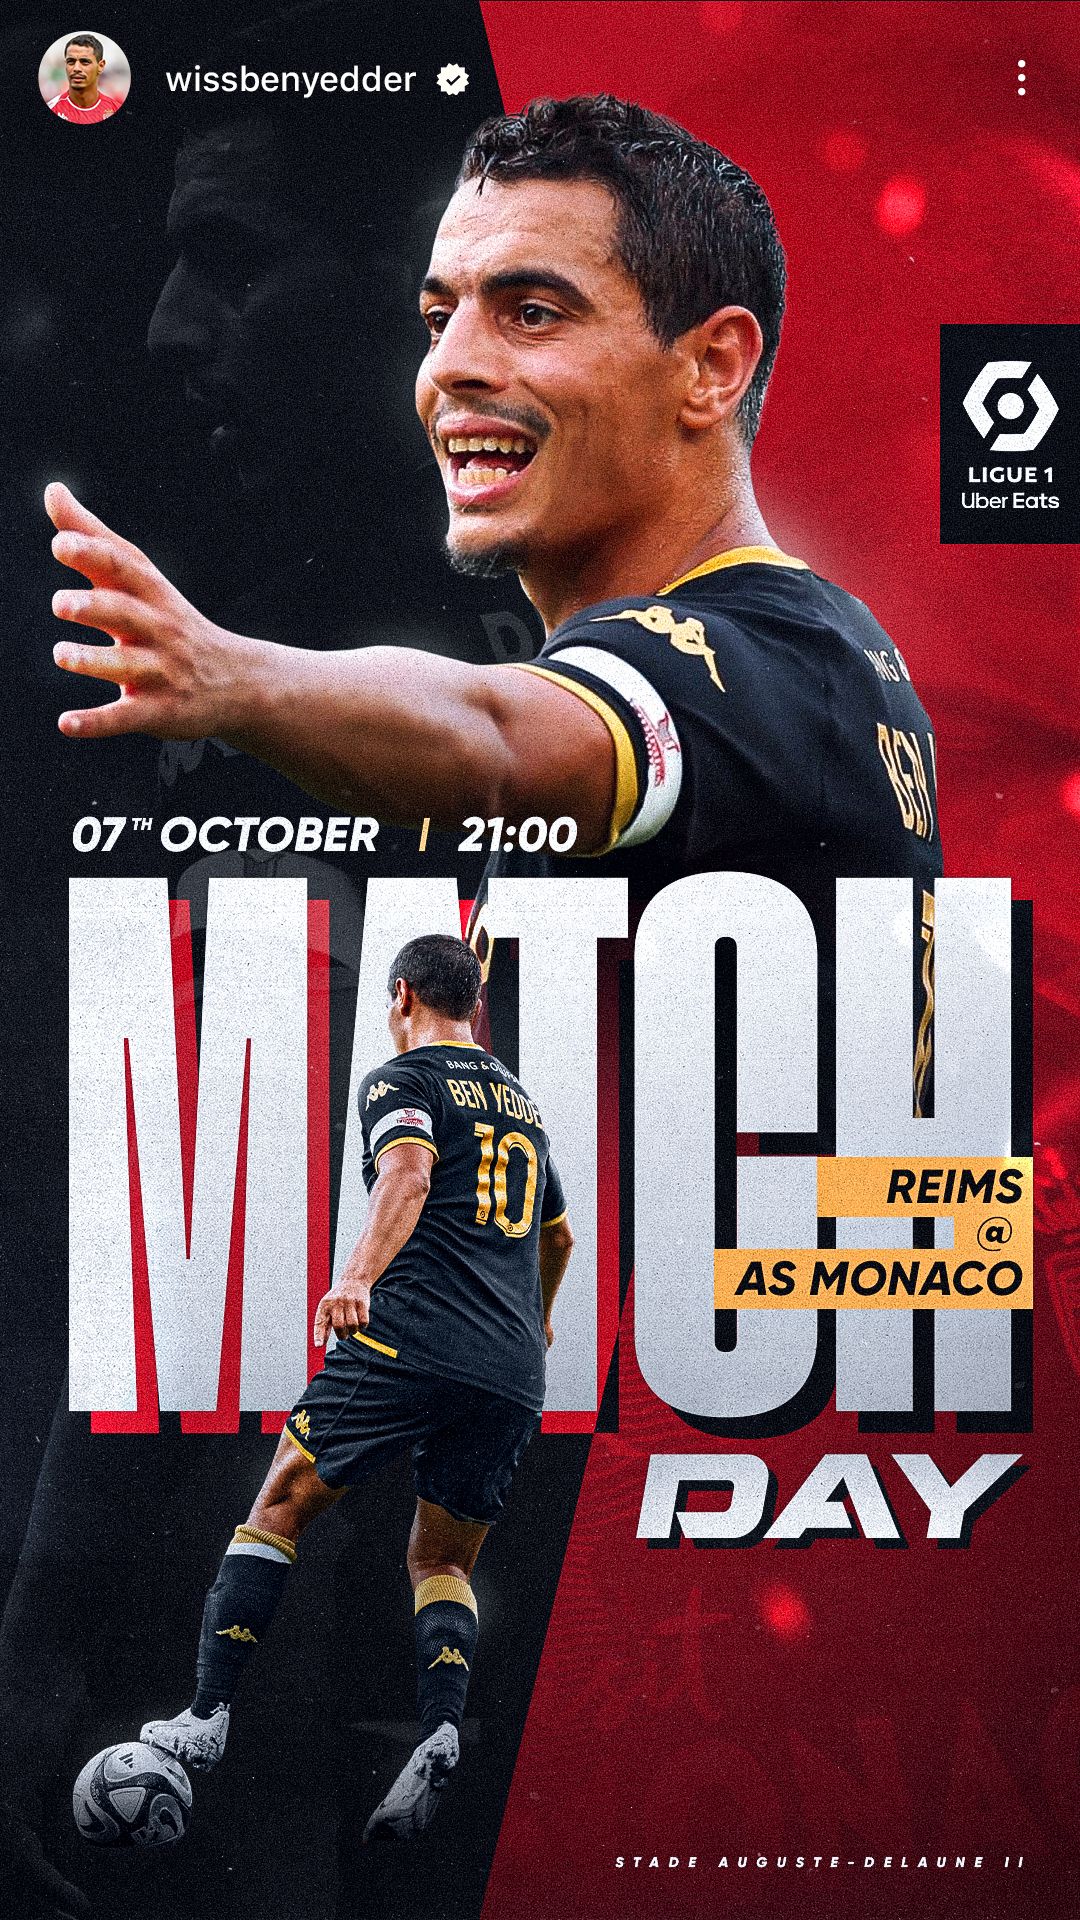 Ligue1 Matchday / Gameday / Sports / Poster graphic design|Pinterest